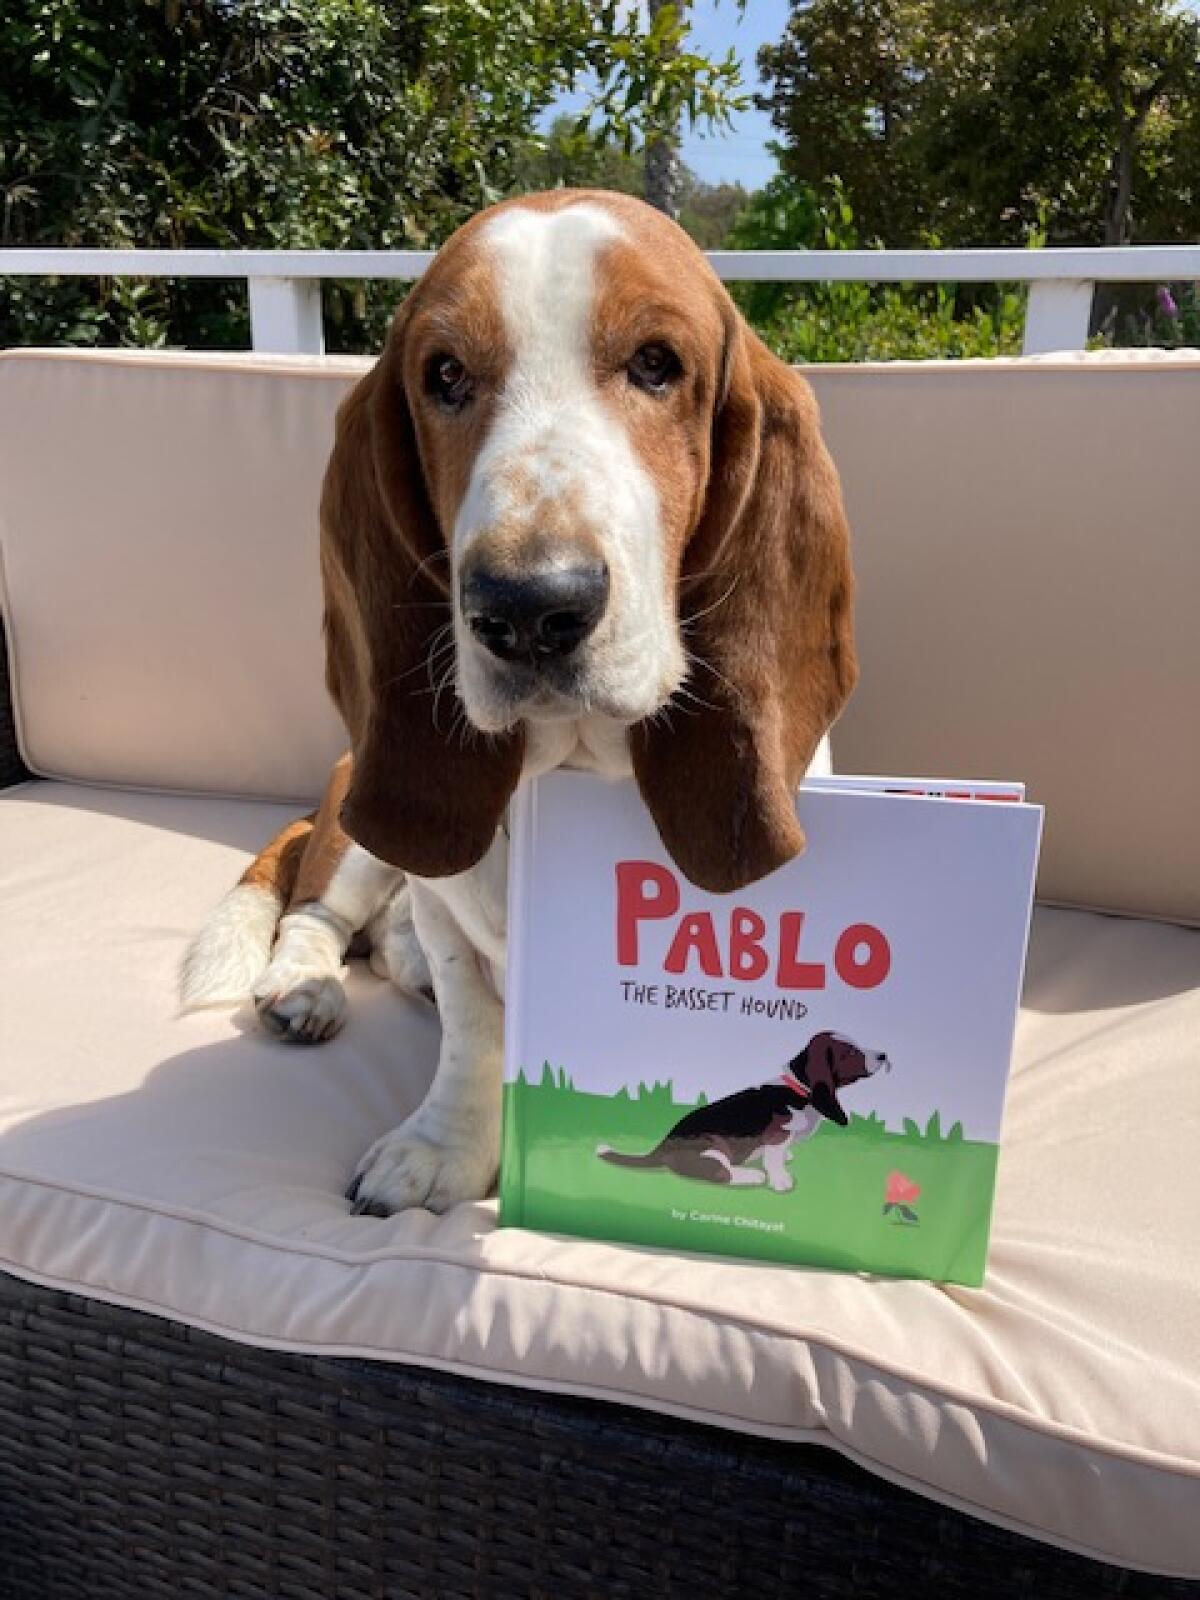 Pablo and the book inspired by him,